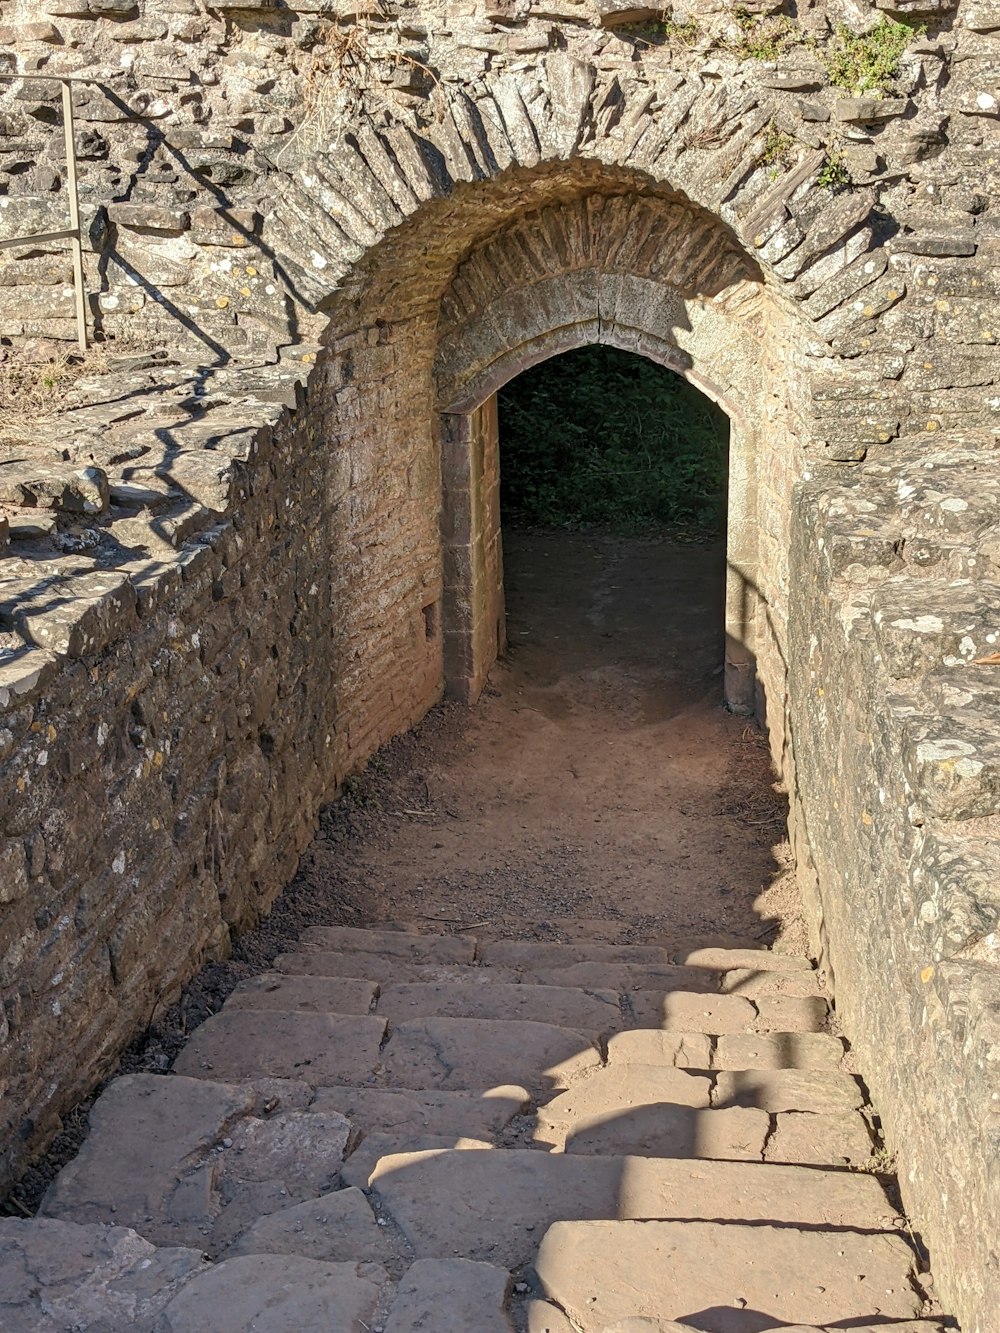 a stone walkway with a stone archway